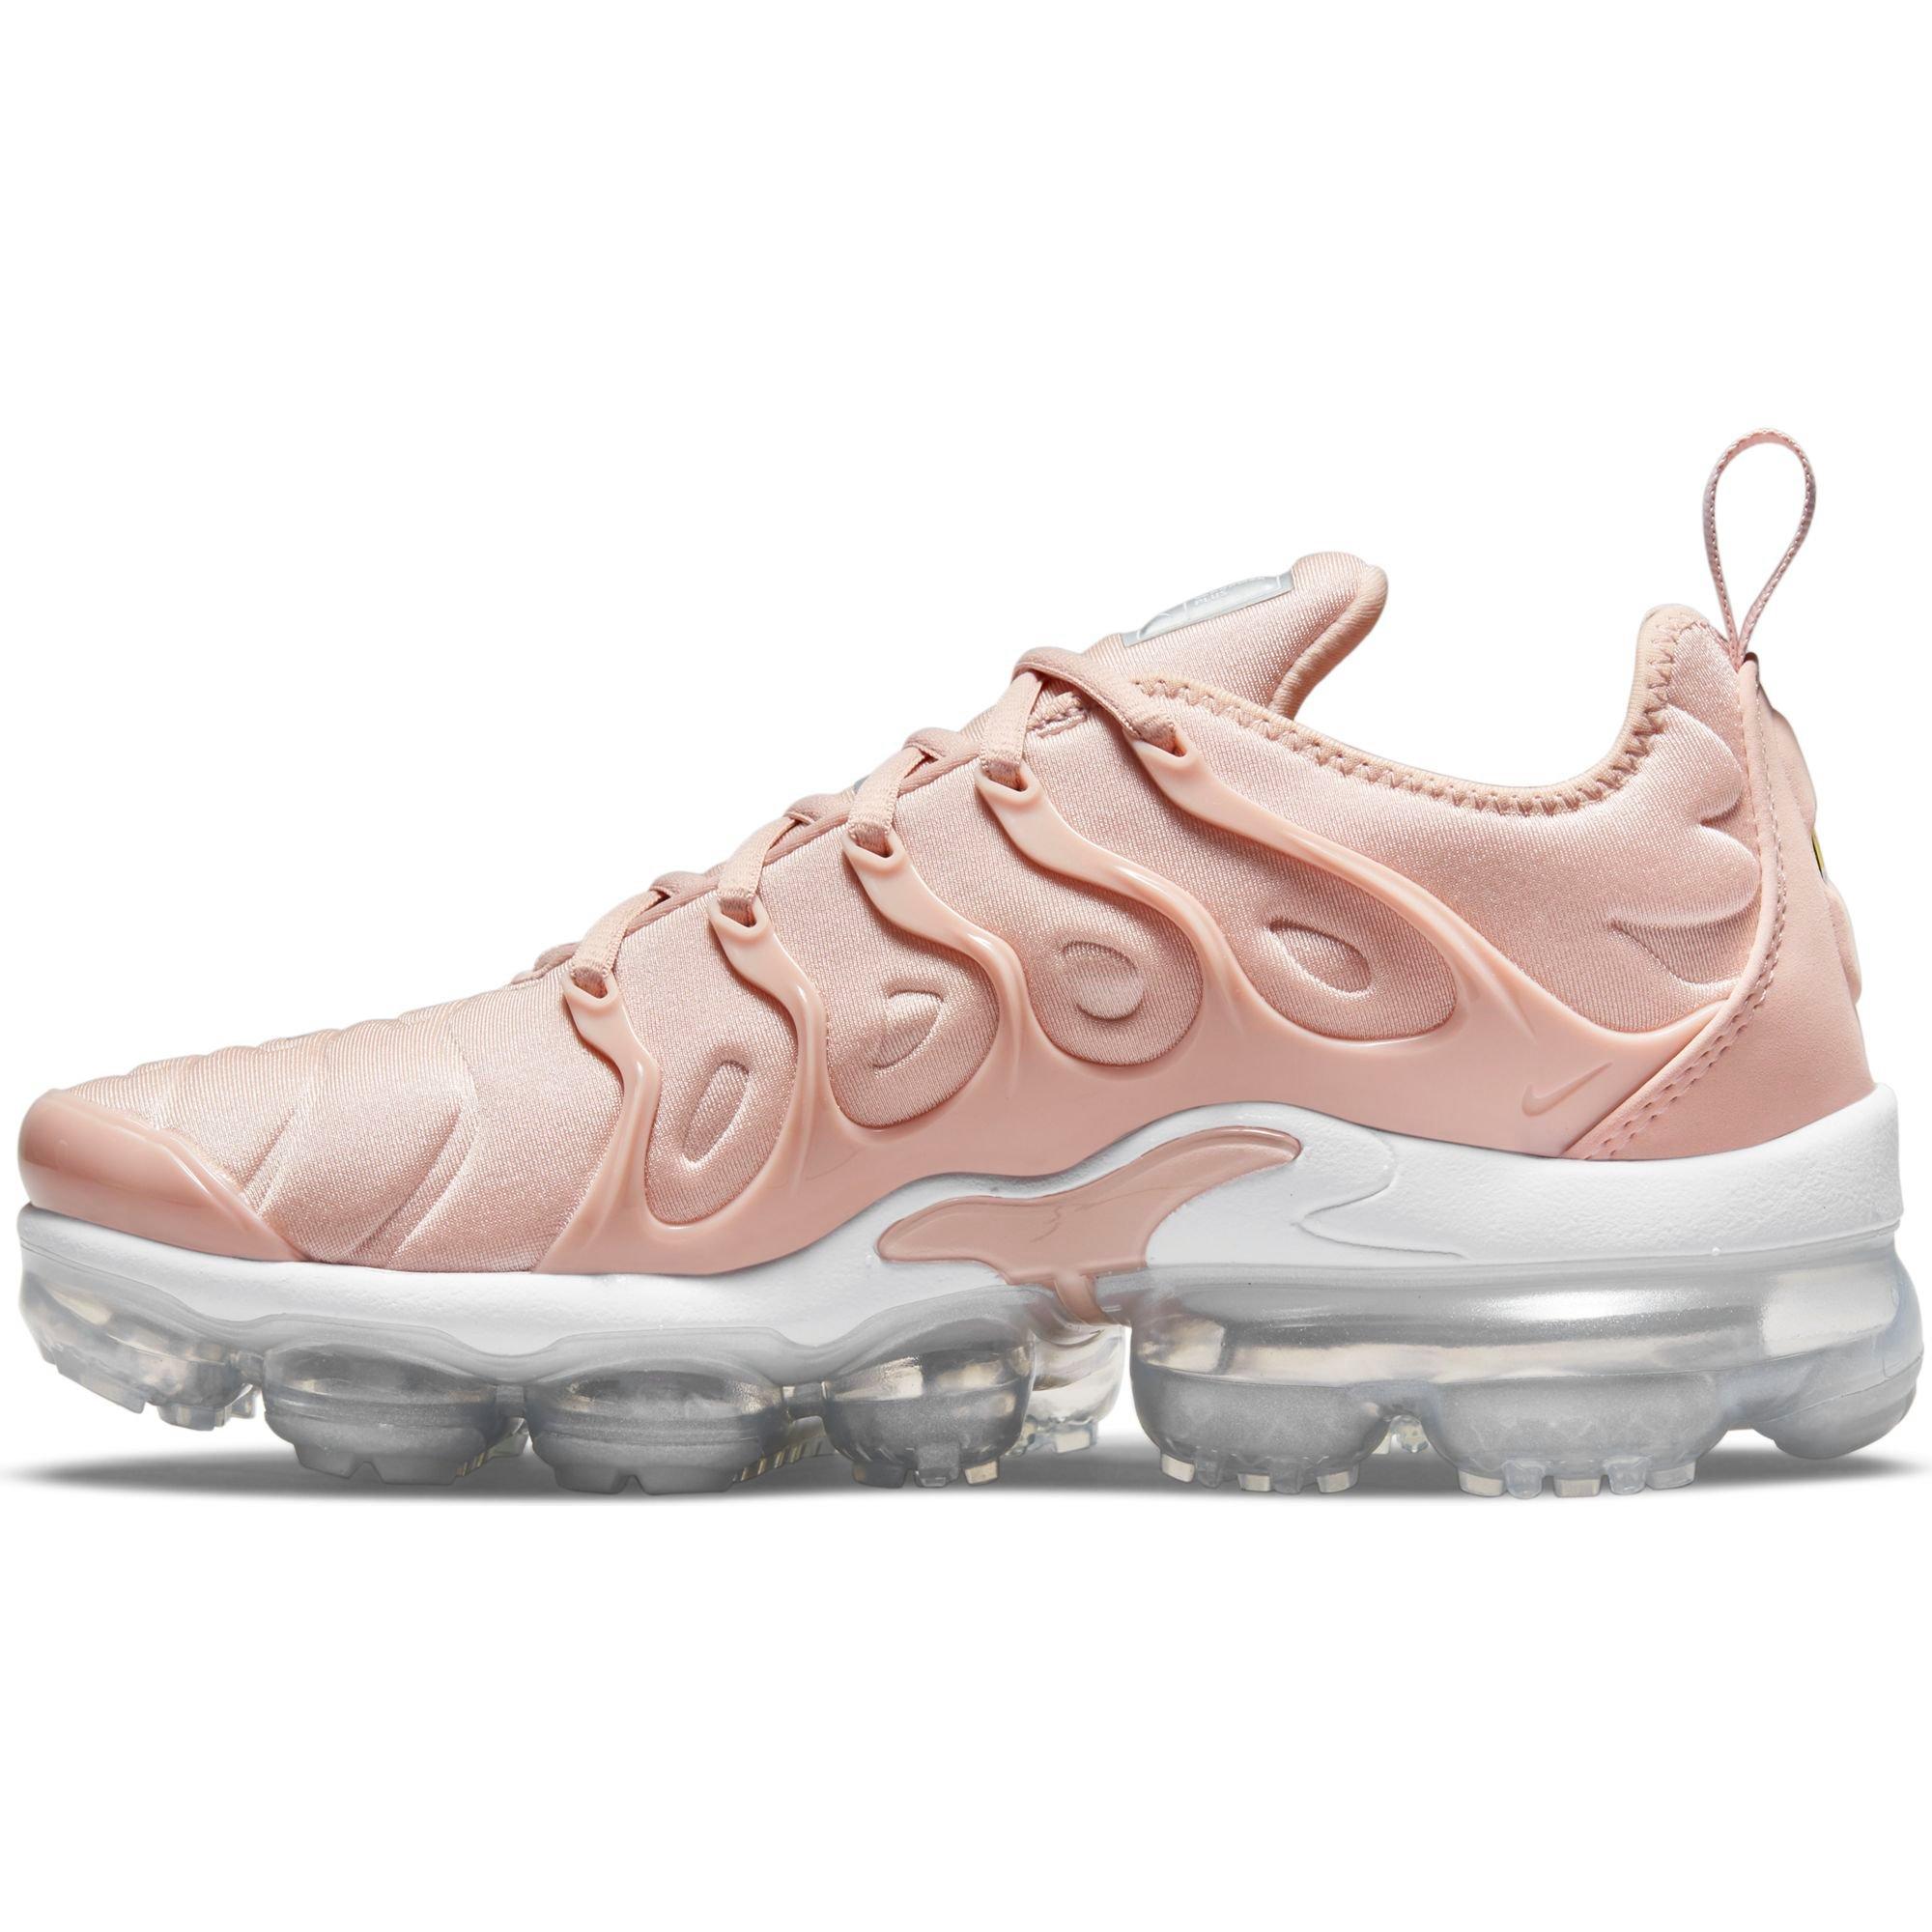 white and pink vapormax plus